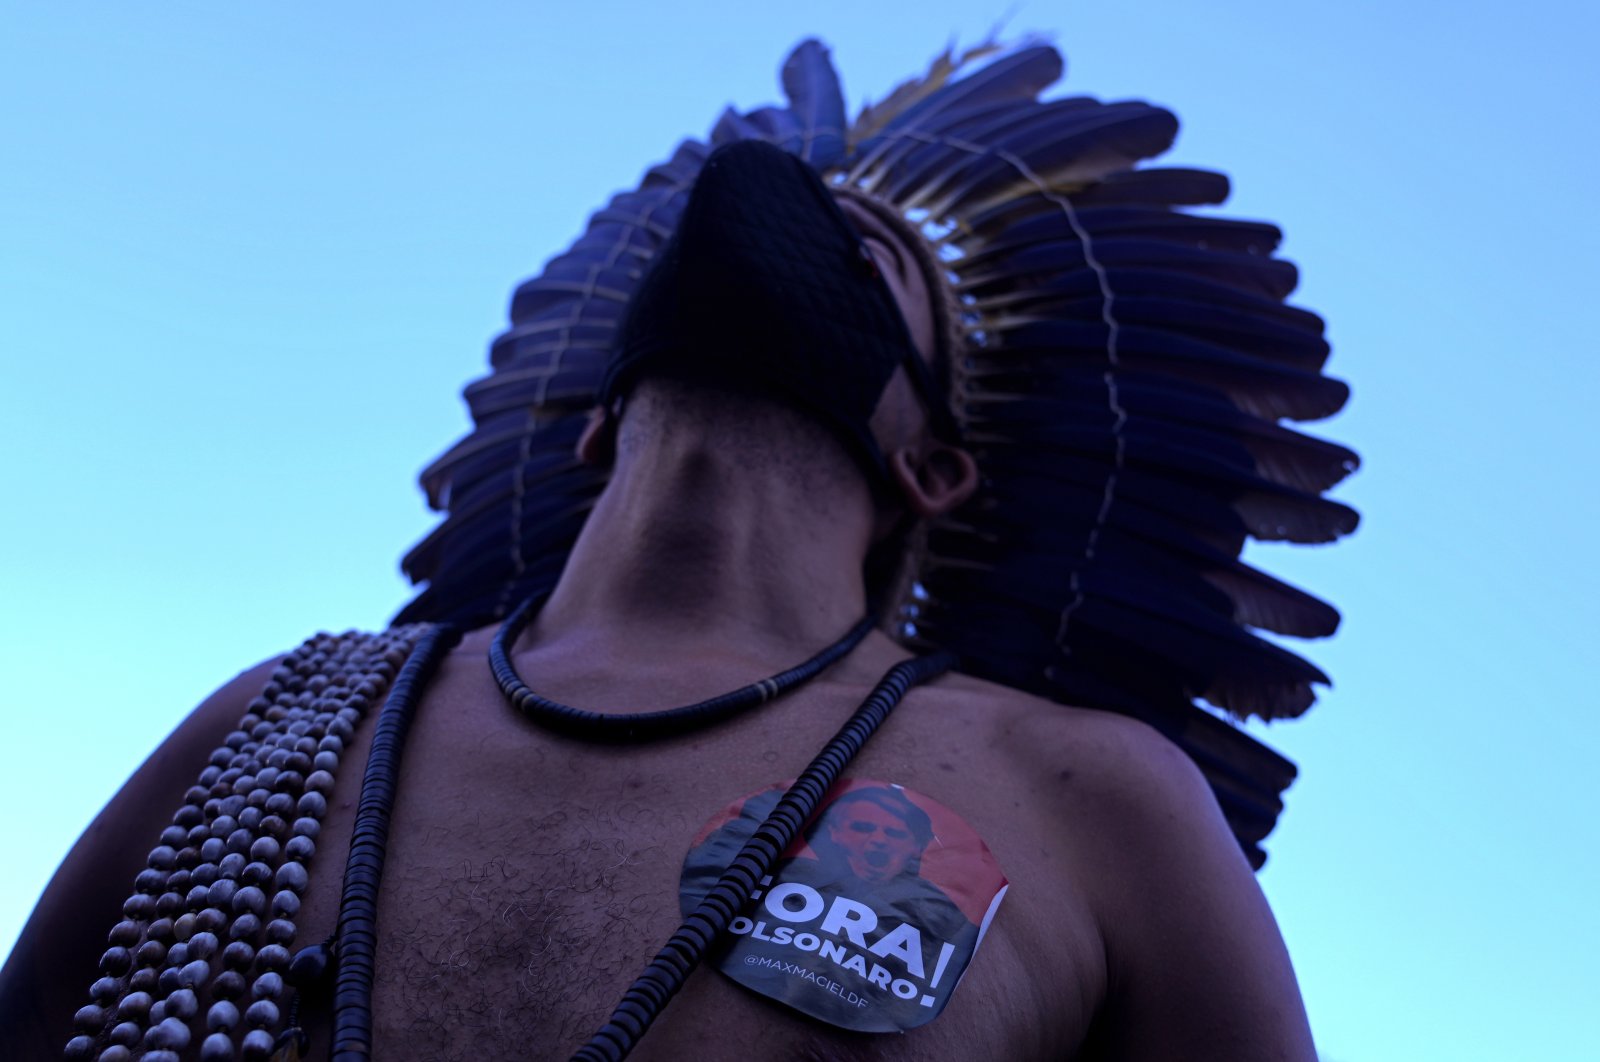 An indigenous Pataxo man with a sticker on his chest that reads in Portuguese &quot;Out Bolsonaro,&quot; participates in a demonstration by the &quot;Act for the Earth&quot; movement in front of the National Congress in Brasilia, Brazil, March 9, 2022. (AP Photo)